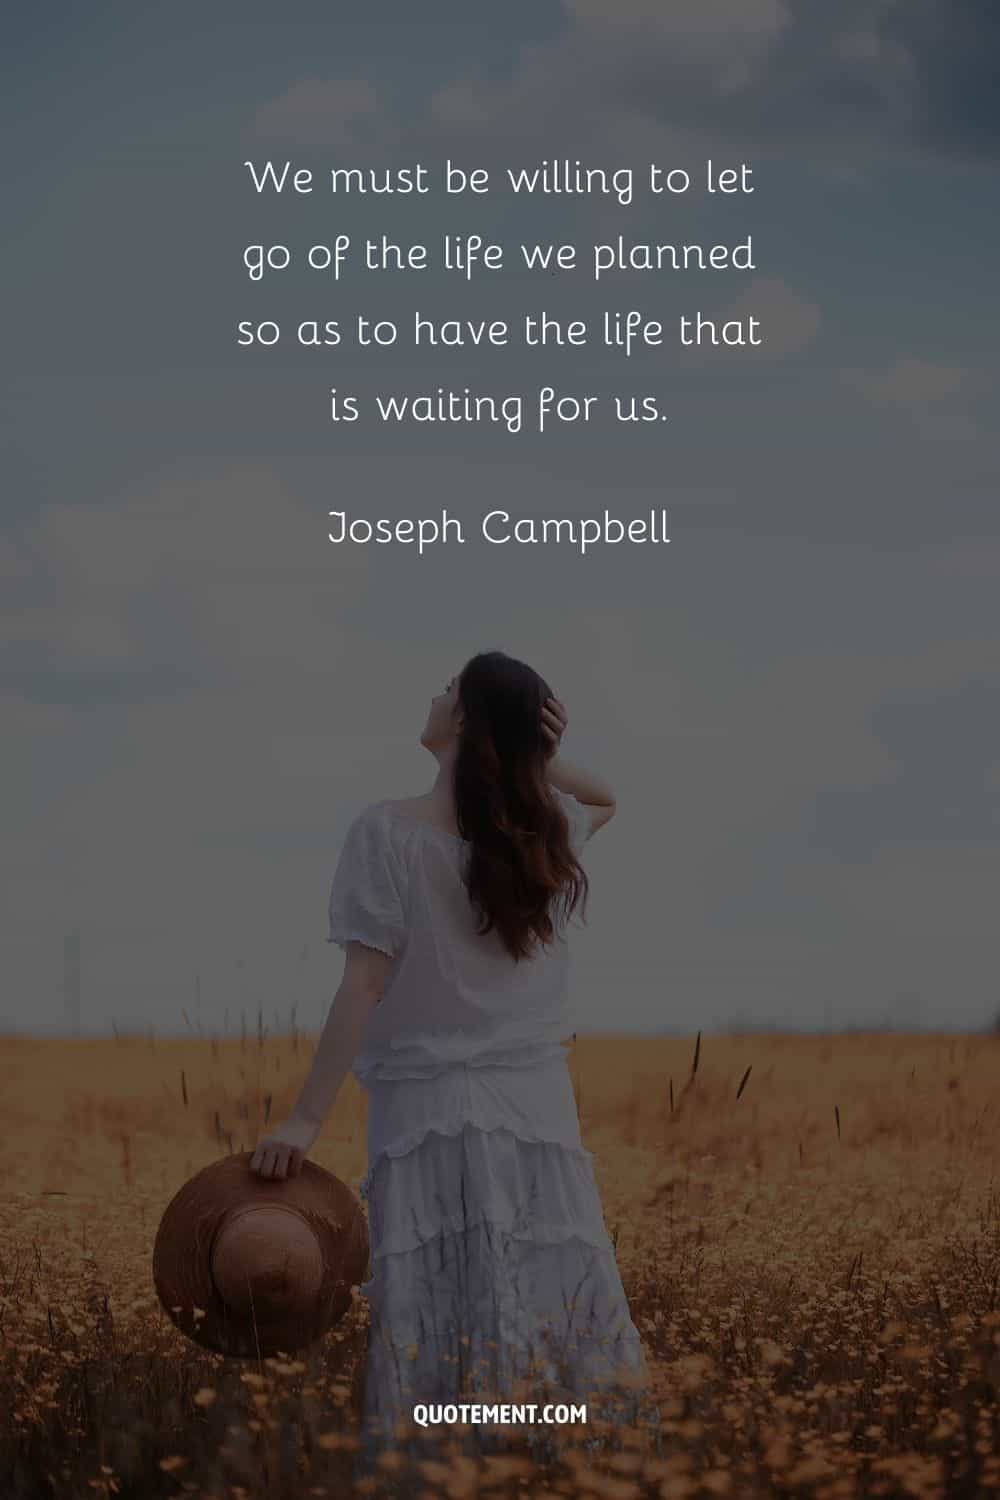 “We must be willing to let go of the life we planned so as to have the life that is waiting for us.” — Joseph Campbell